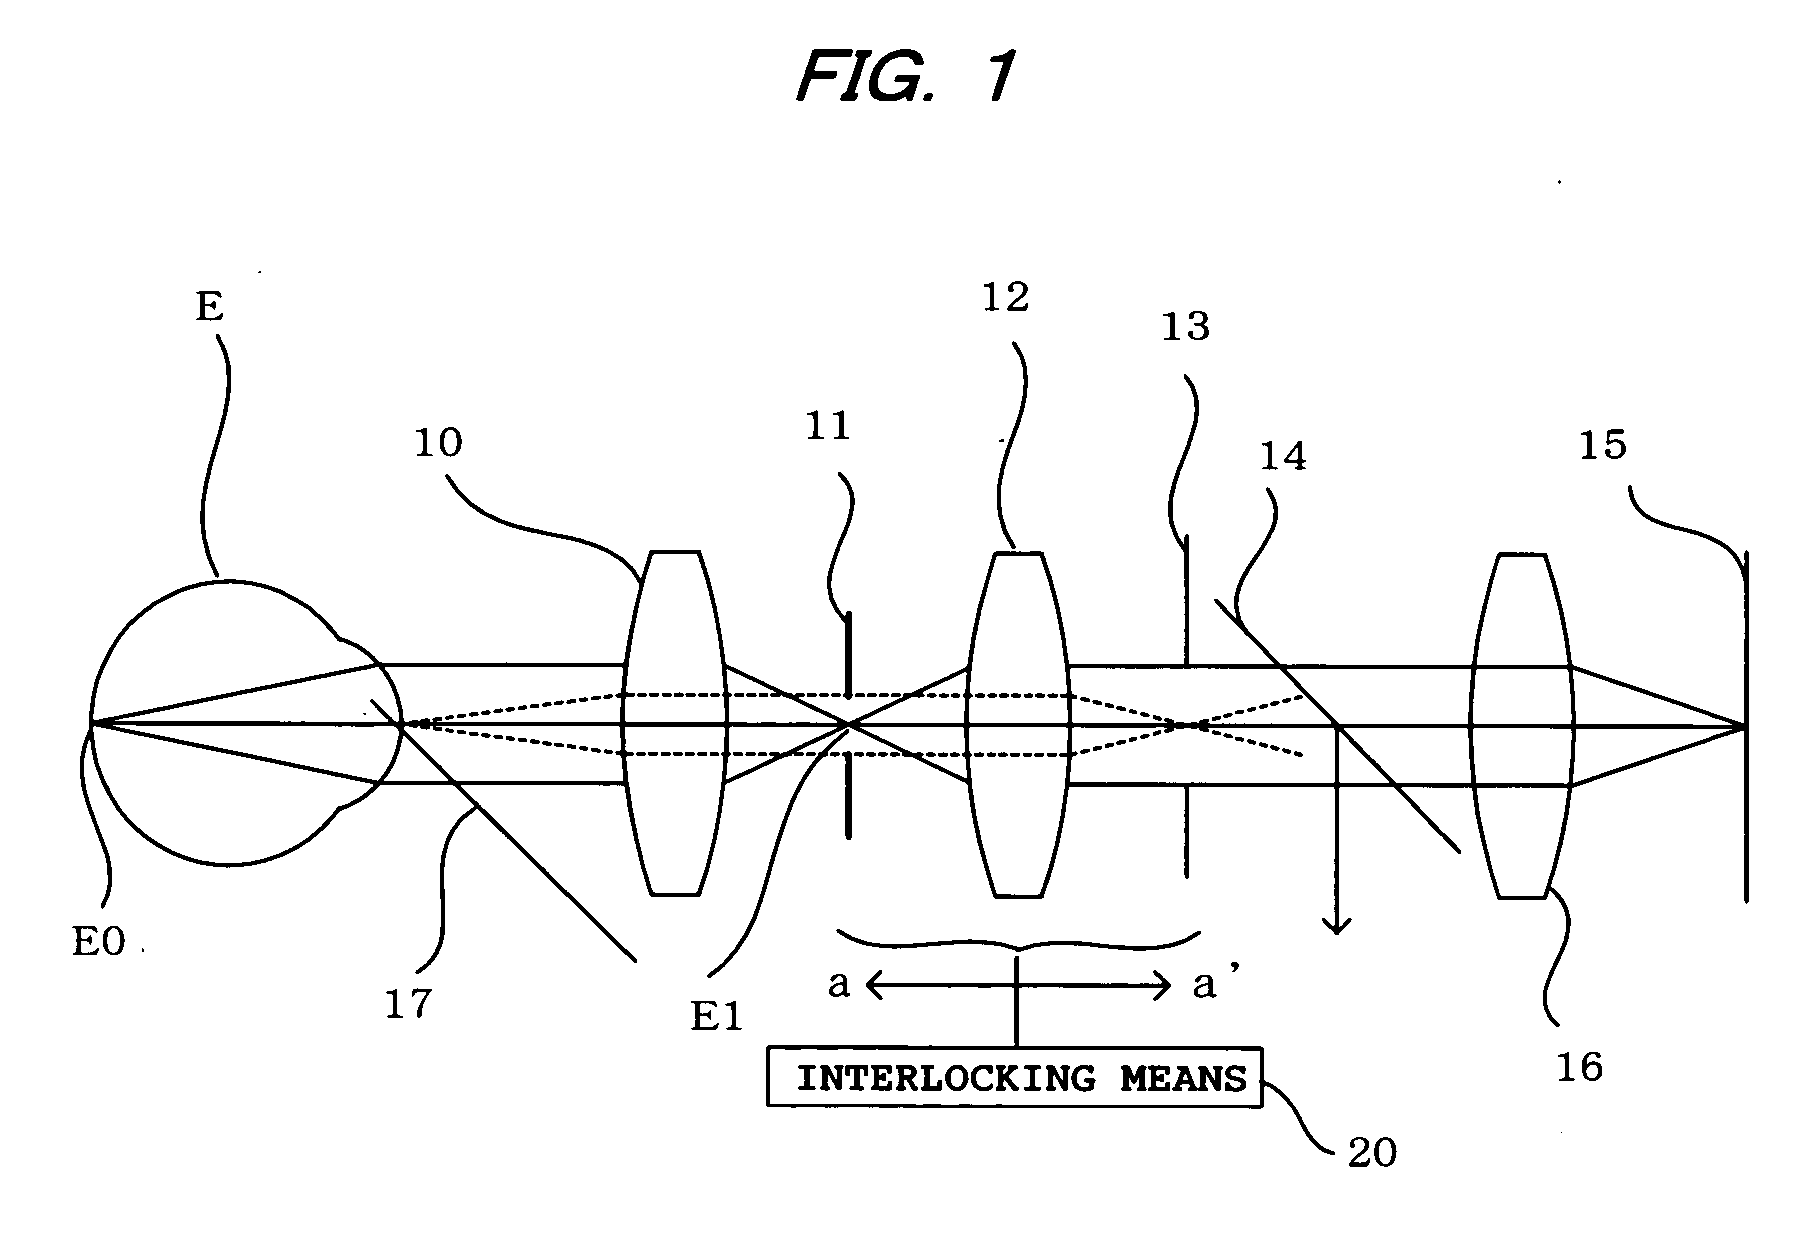 Ophthalmic photographic apparatus